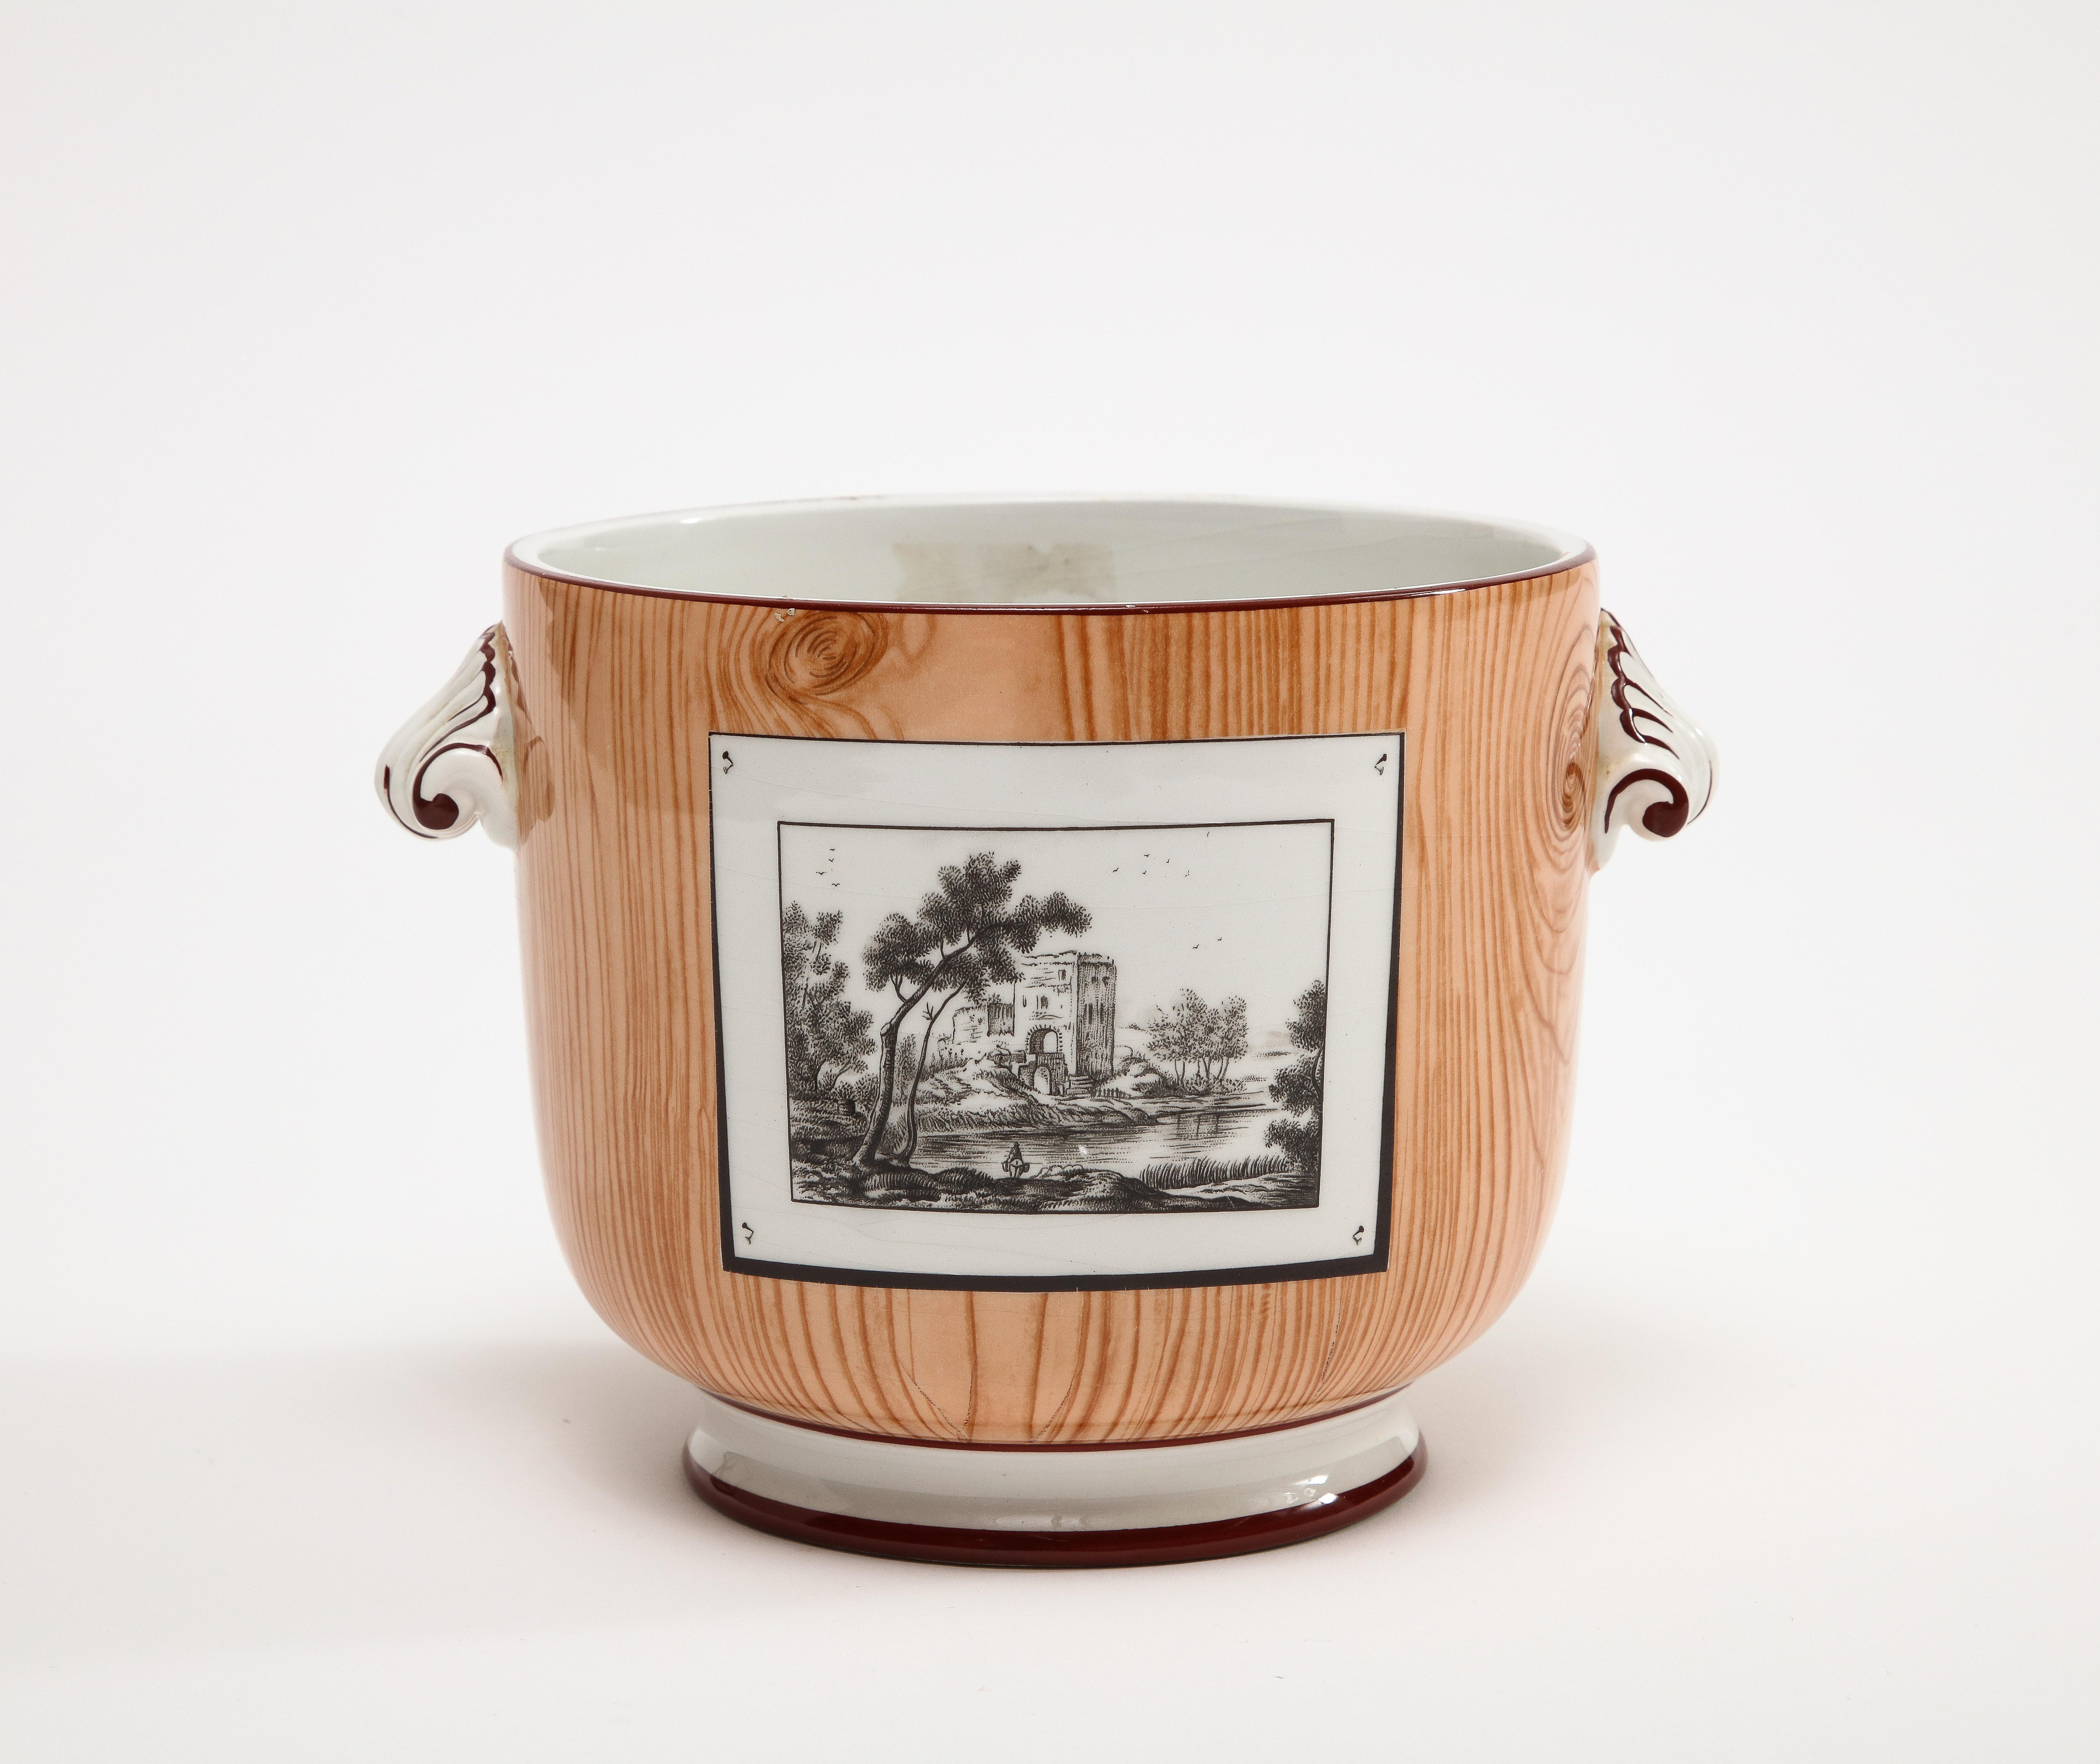 Signed Tiffany & Co. hand-painted scenic cache pot planter with applied shell handles, circa 1950s, made in Italy. The pot is painted with a wood grain and knot pattern with black & white postcard pictures of Italian scenery. 

Additional Dimensions